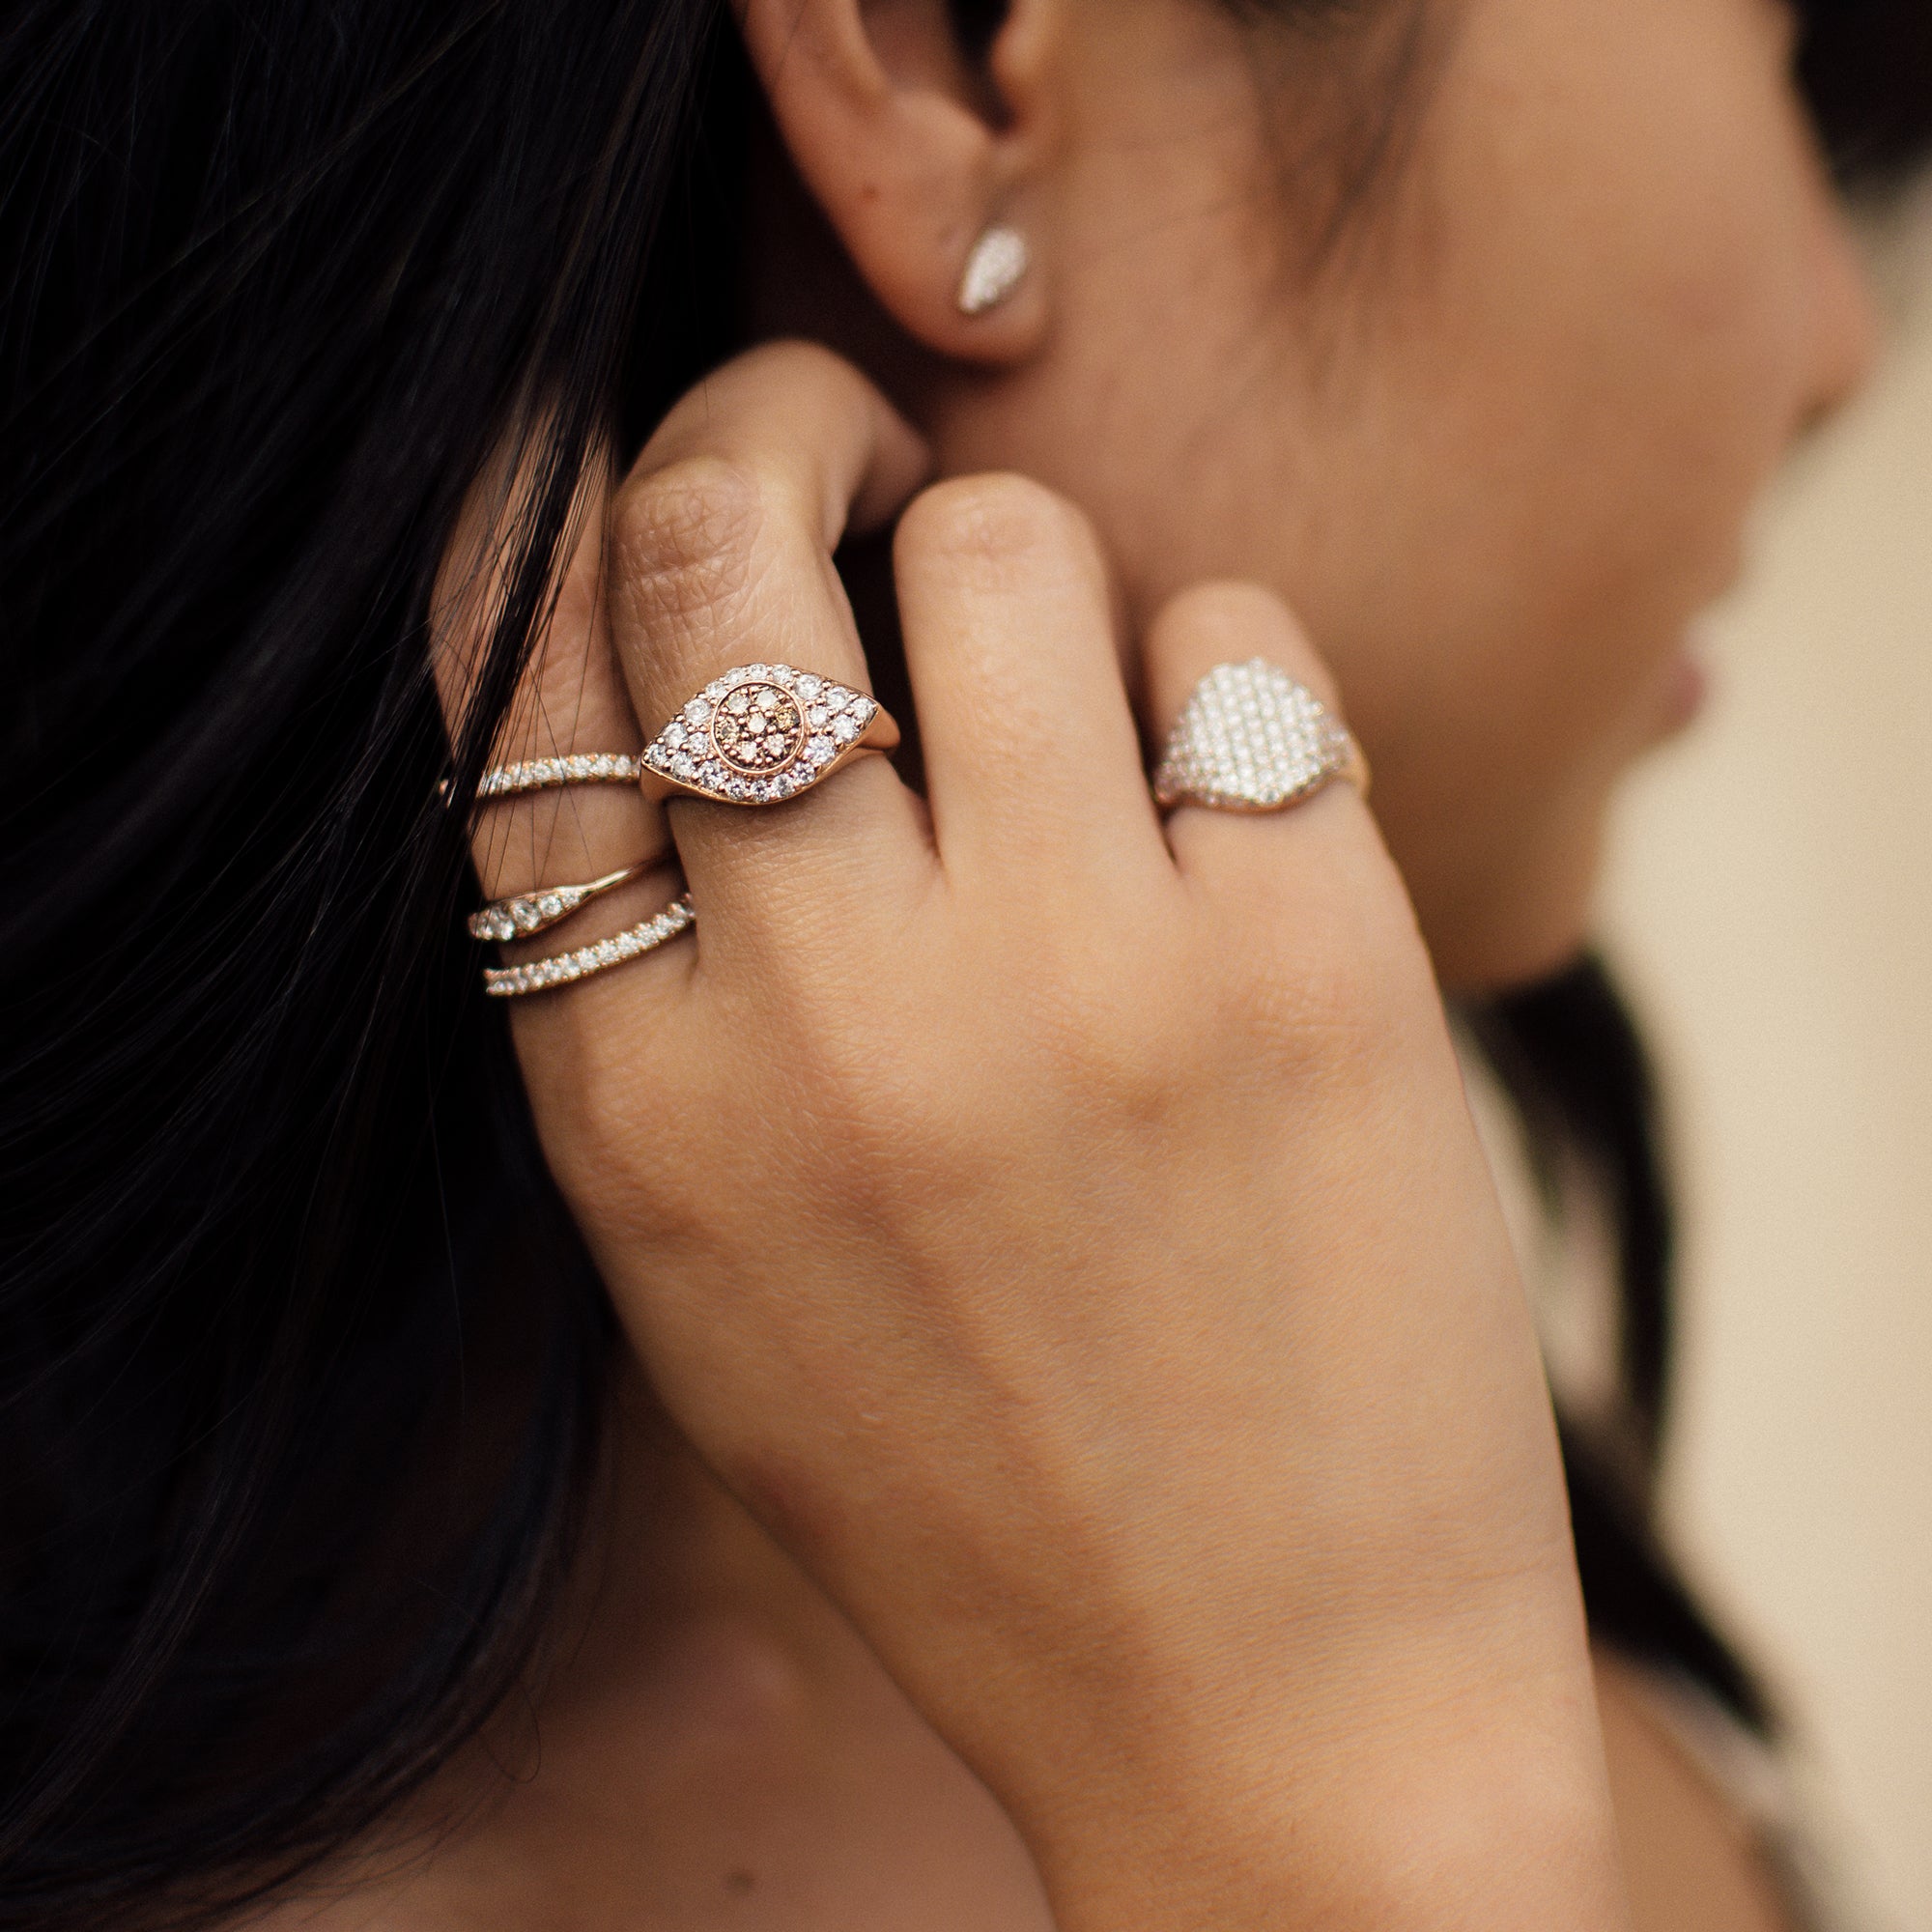 The Drishti Ring shown with our glamorous Bling Ring.